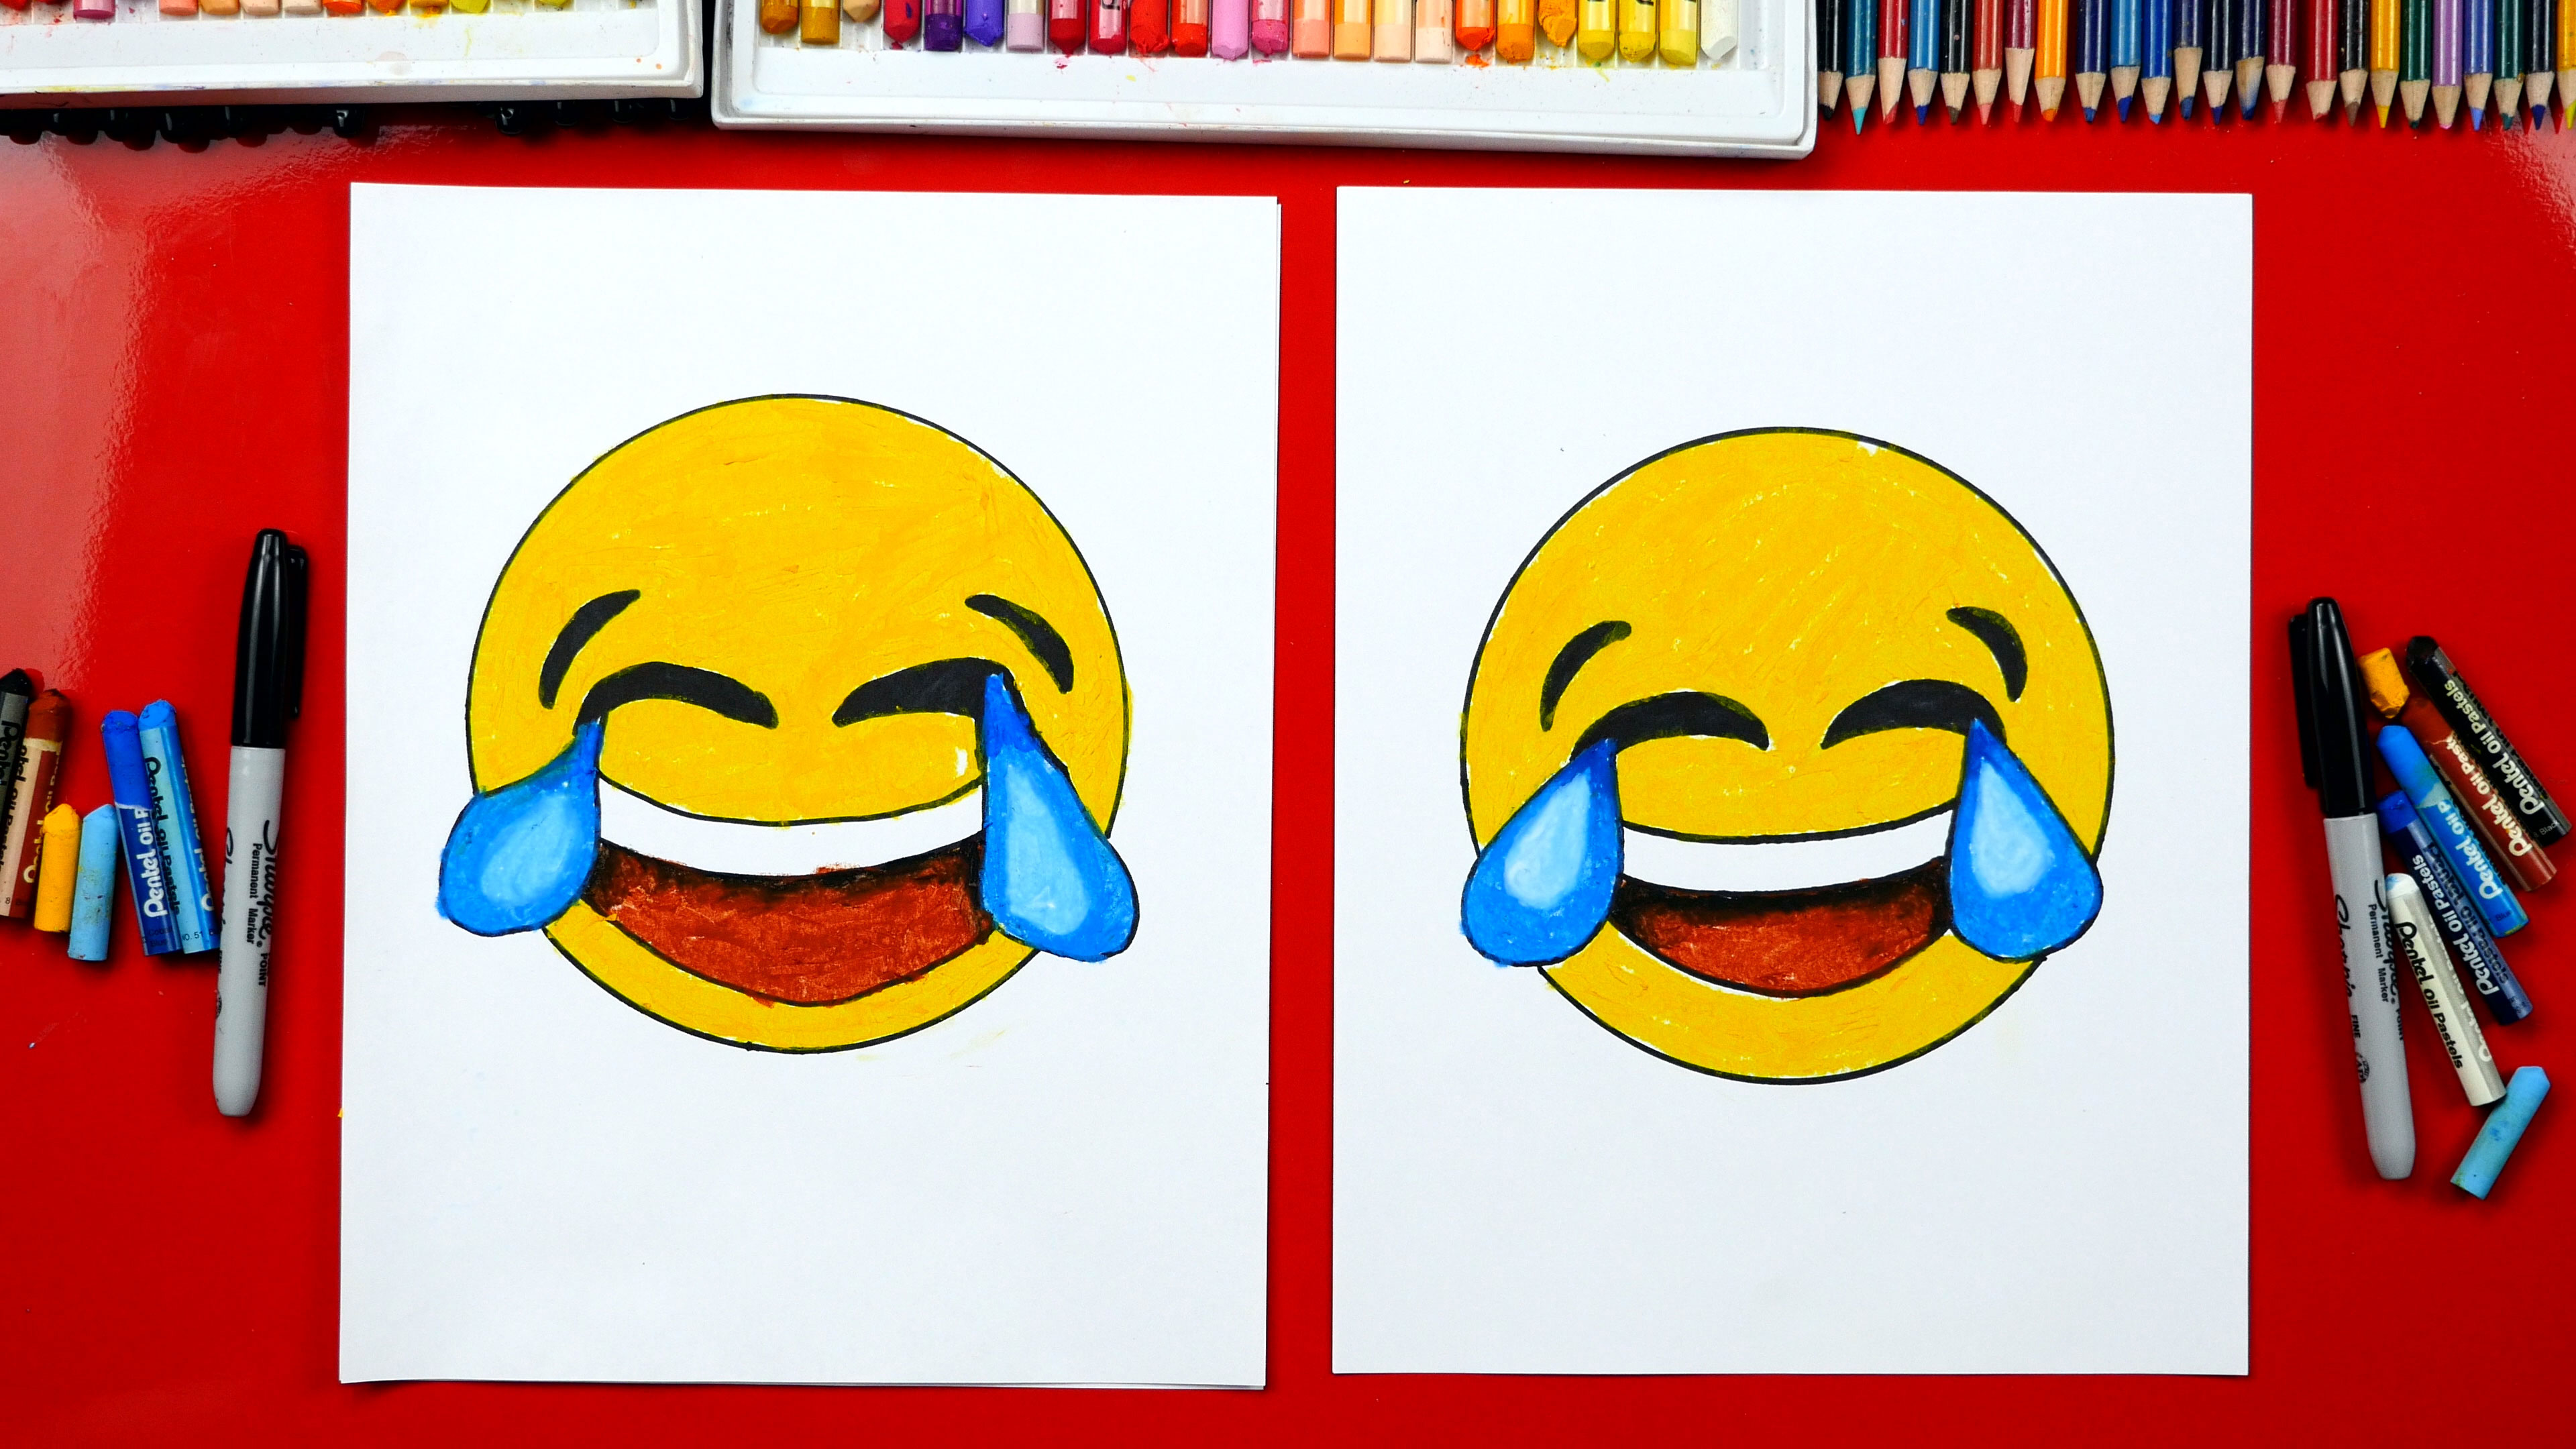 HOW TO DRAW THE SMILE 😄 EMOJI - YouTube